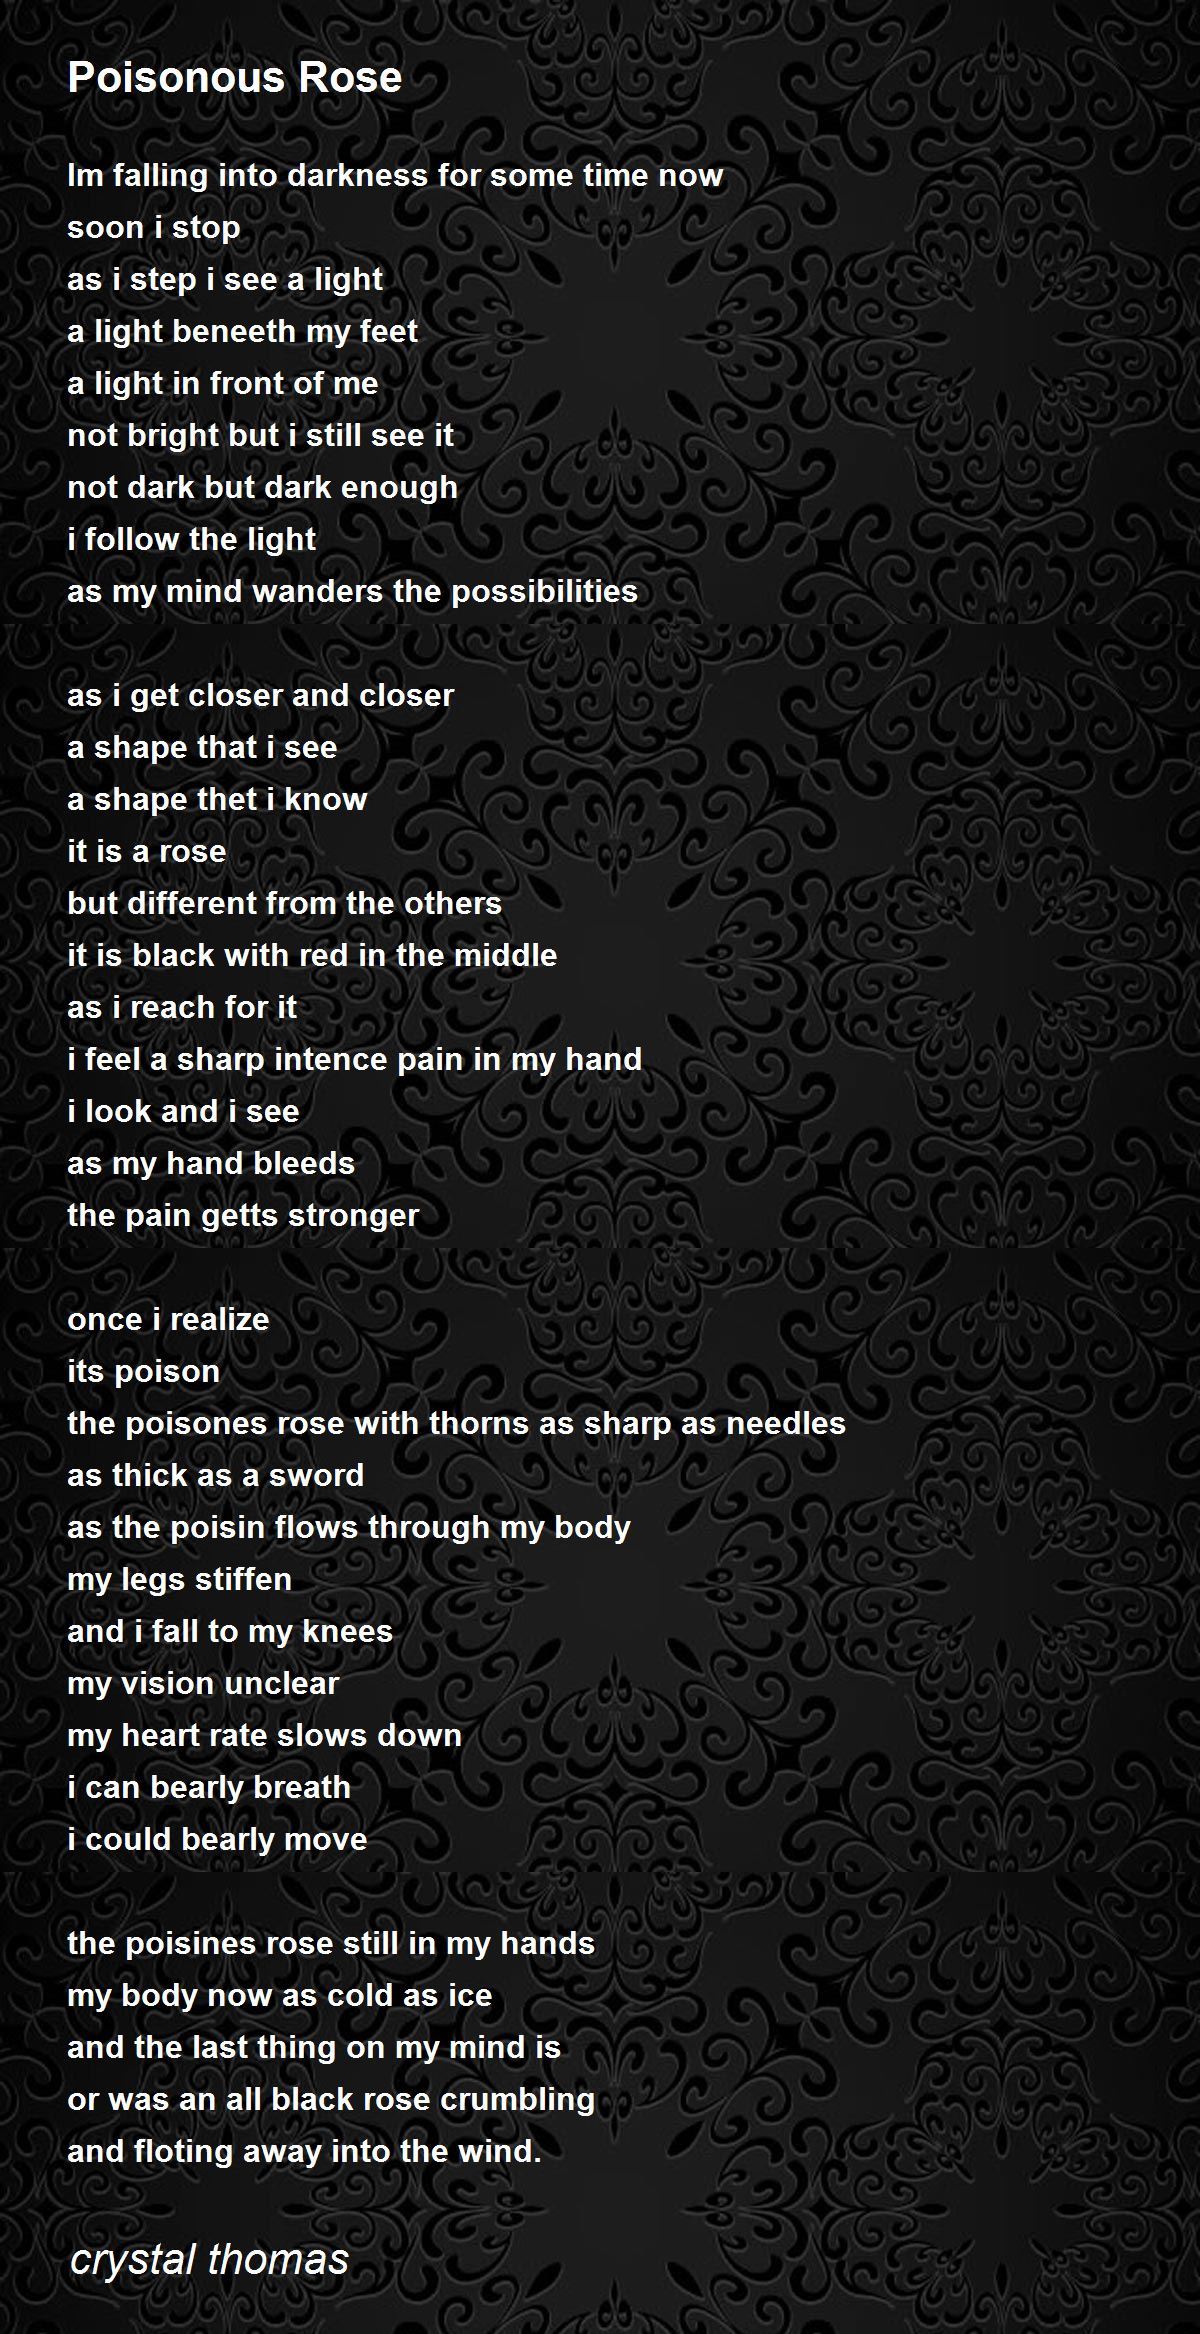 Poisonous Rose by crystal thomas - Poisonous Rose Poem